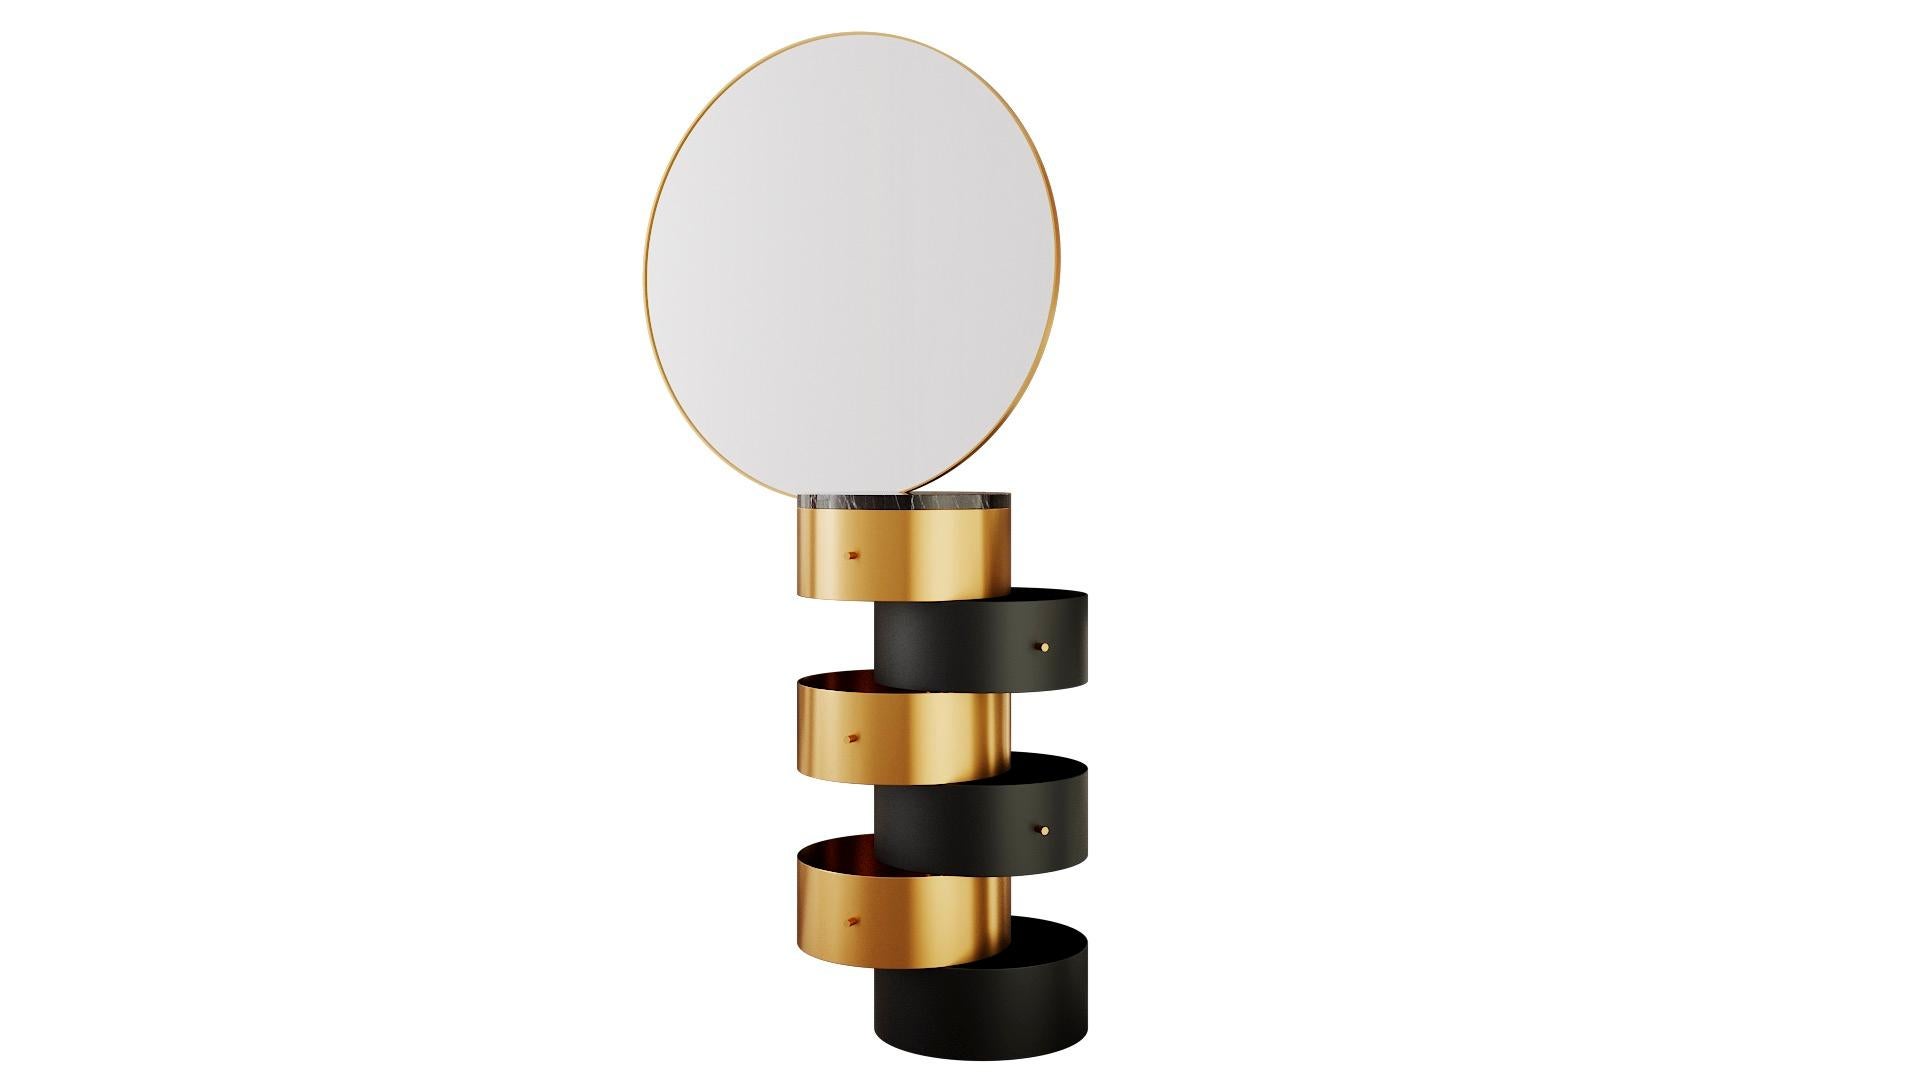 Strings gold and black metal vanity table with mirror by Nika Zupanc, is a vanity table with a surprising form - its circular metal drawers with a large mirror look stunning with the Strings Pouf. 

The word strings evokes a vision of lightness in